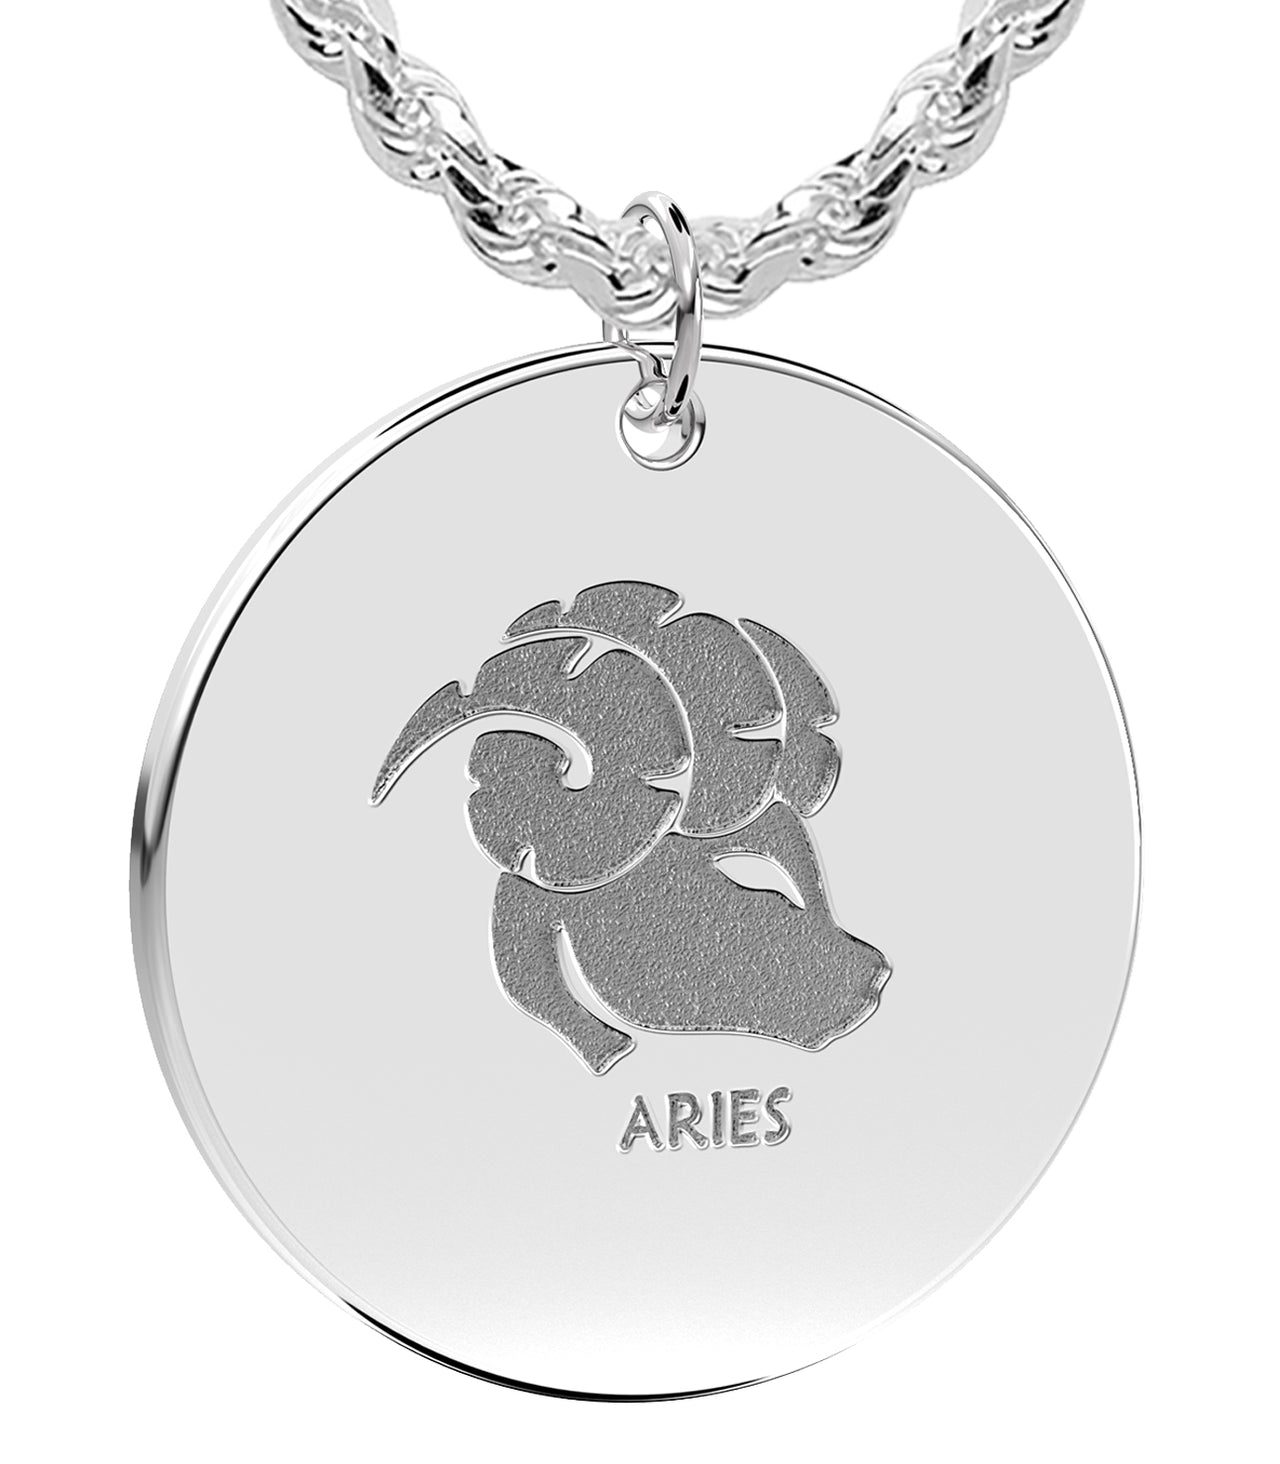 Men's 925 Sterling Silver 1in Round Aries Zodiac Polished Pendant Necklace